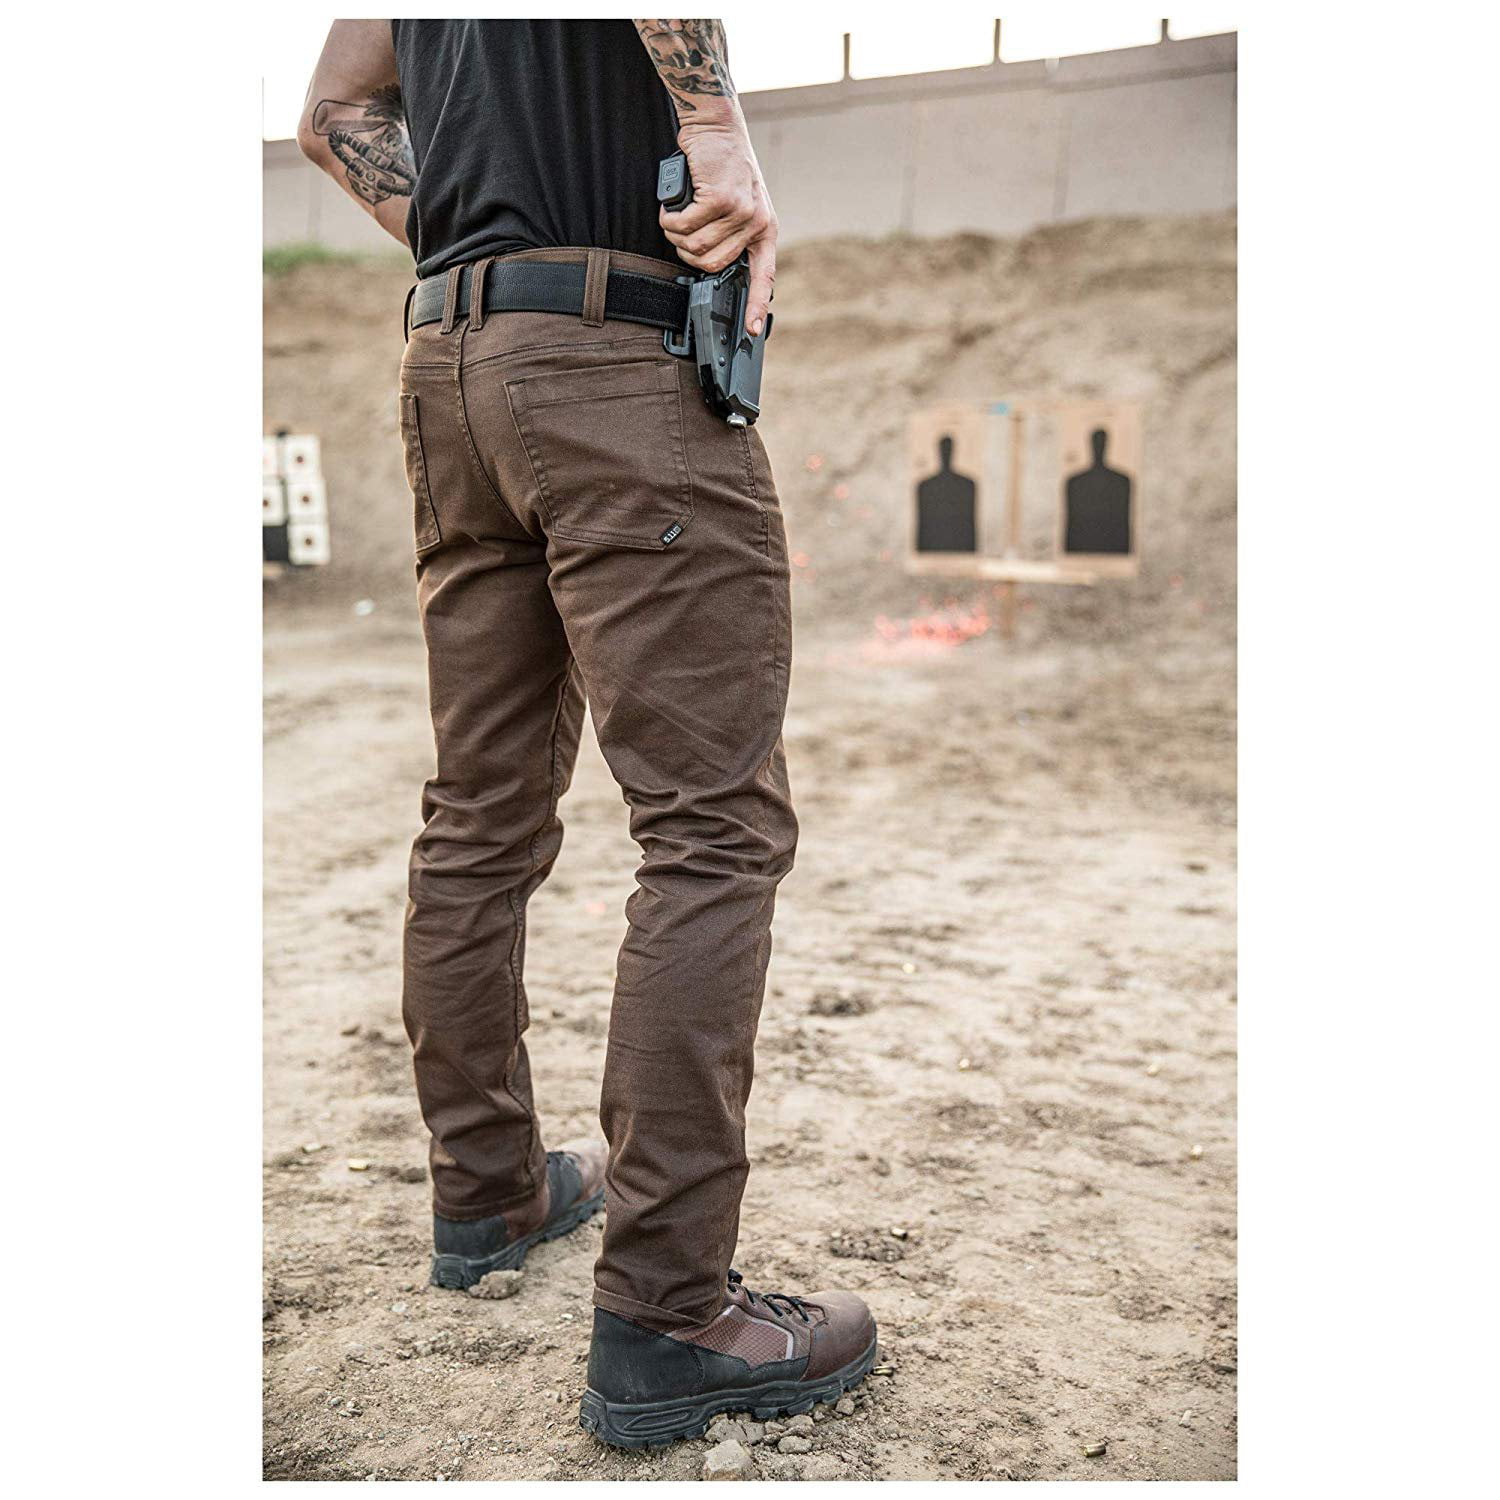 Twill Poly-Cotton 5.11 Tactical Mens Defender-Flex Slim Pants Outdoor Casual Bottom Style 74464